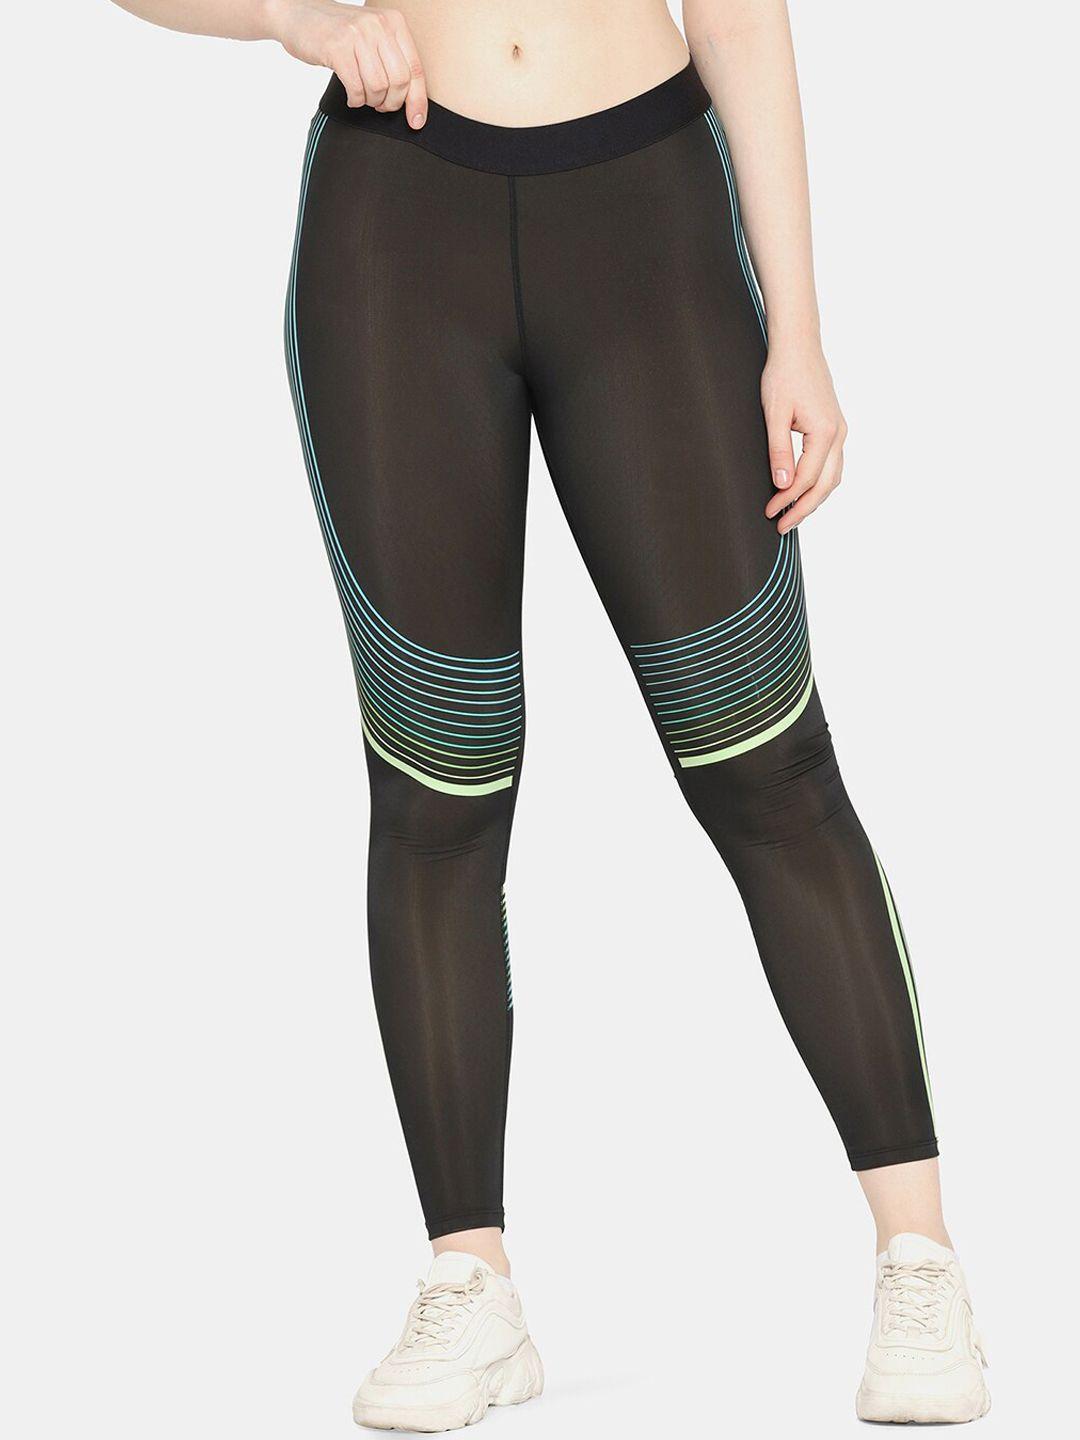 da intimo women printed dry-fit ankle-length training or gym sports tights